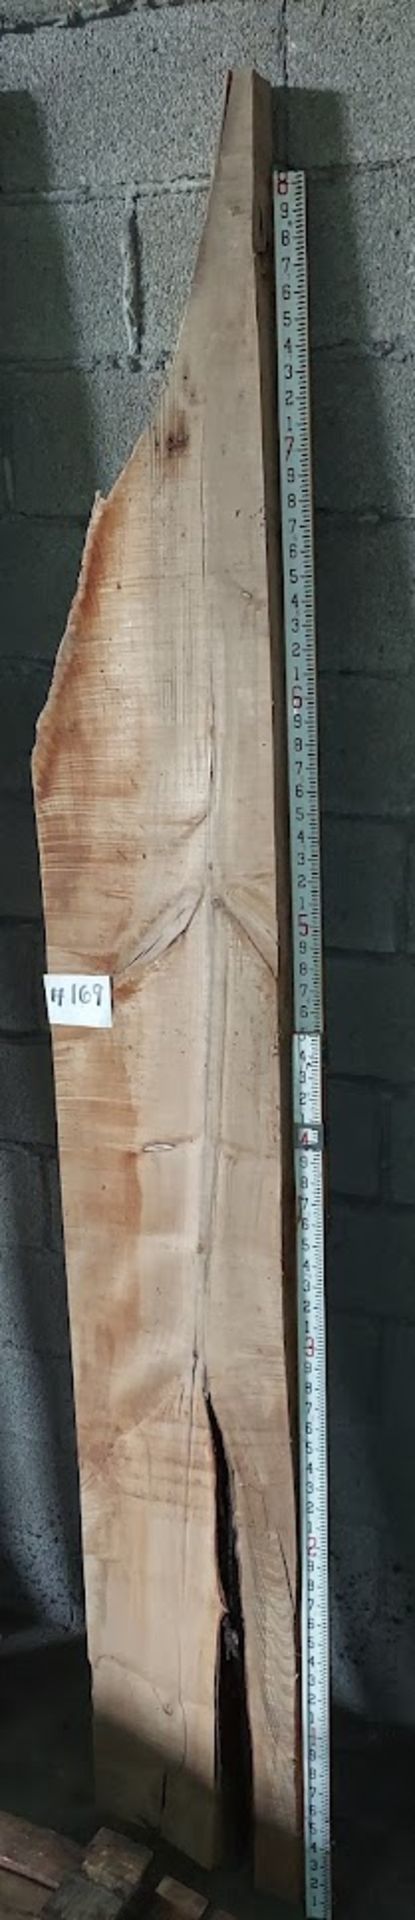 Maple Hardwood Lumber Slab, Size is approx. 101" x 12" x 2-3/4" Thick, Curly (Book Matched 169)